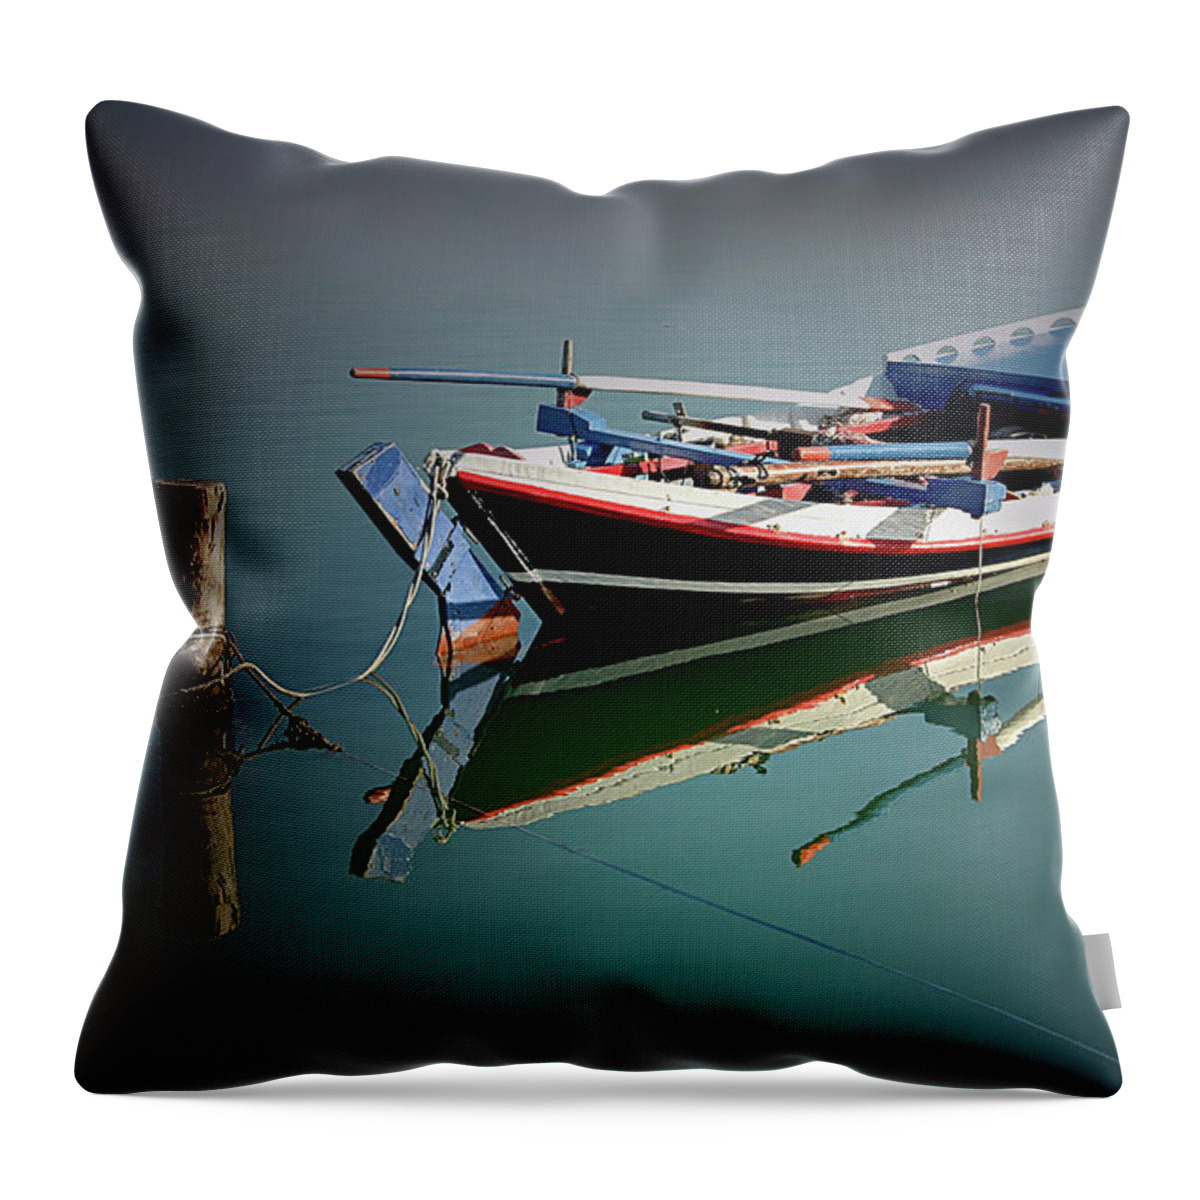 Tranquility Throw Pillow featuring the photograph Boat In Lefkada Greece - Ionion Sea - by © Karolos Trivizas